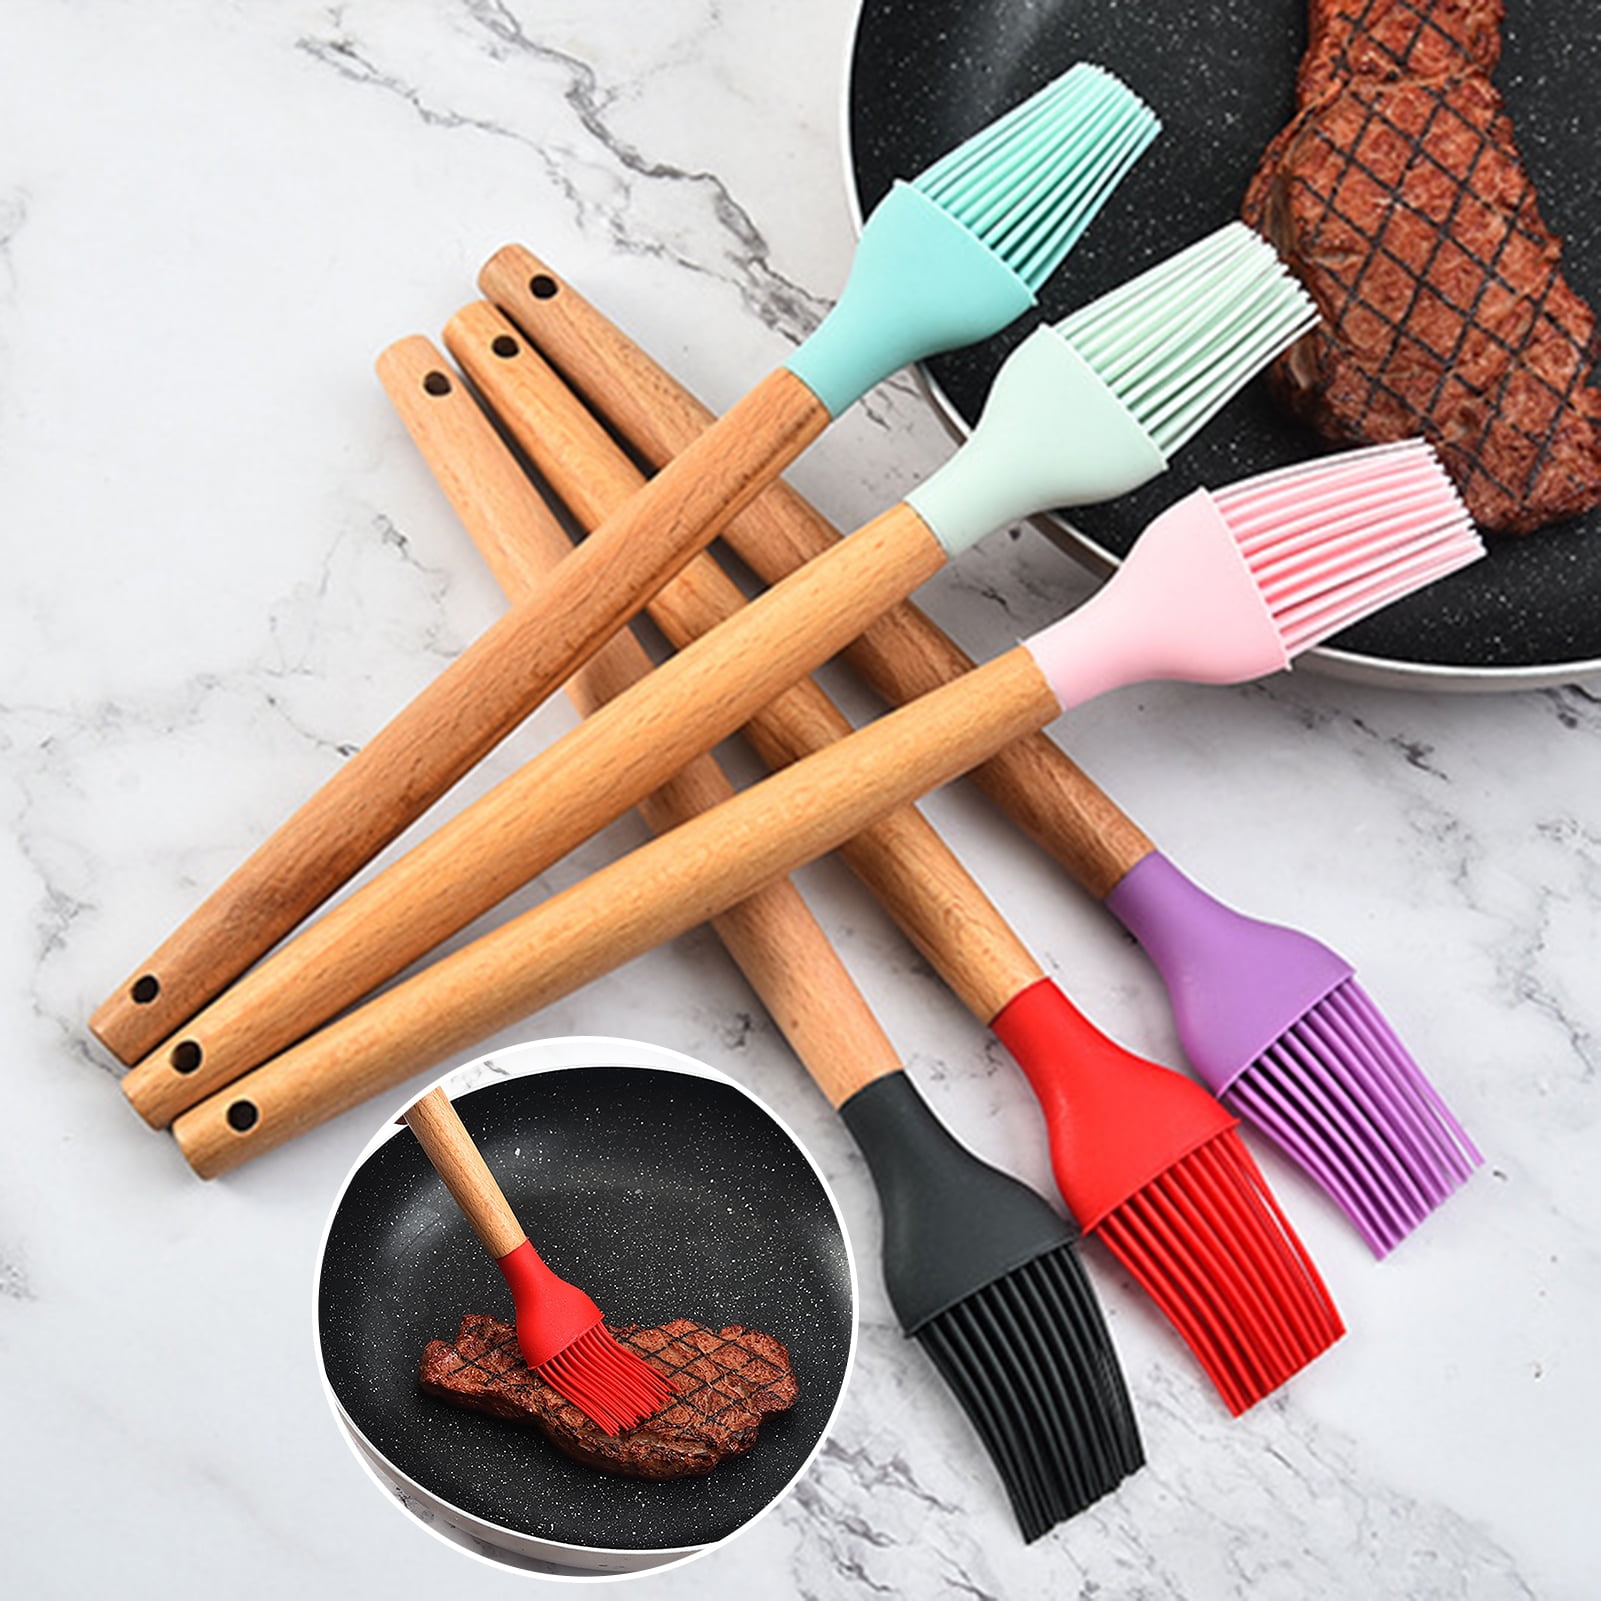 Cooking,Spread Non-Stick Tool Set Cooking Utensils Kitchen Utensil Set Baking Pack of 1 Pastel Pastry Brush & 1 Pastel Spatulas with Beech Wood Handle BBQ Grill Barbecue Blue